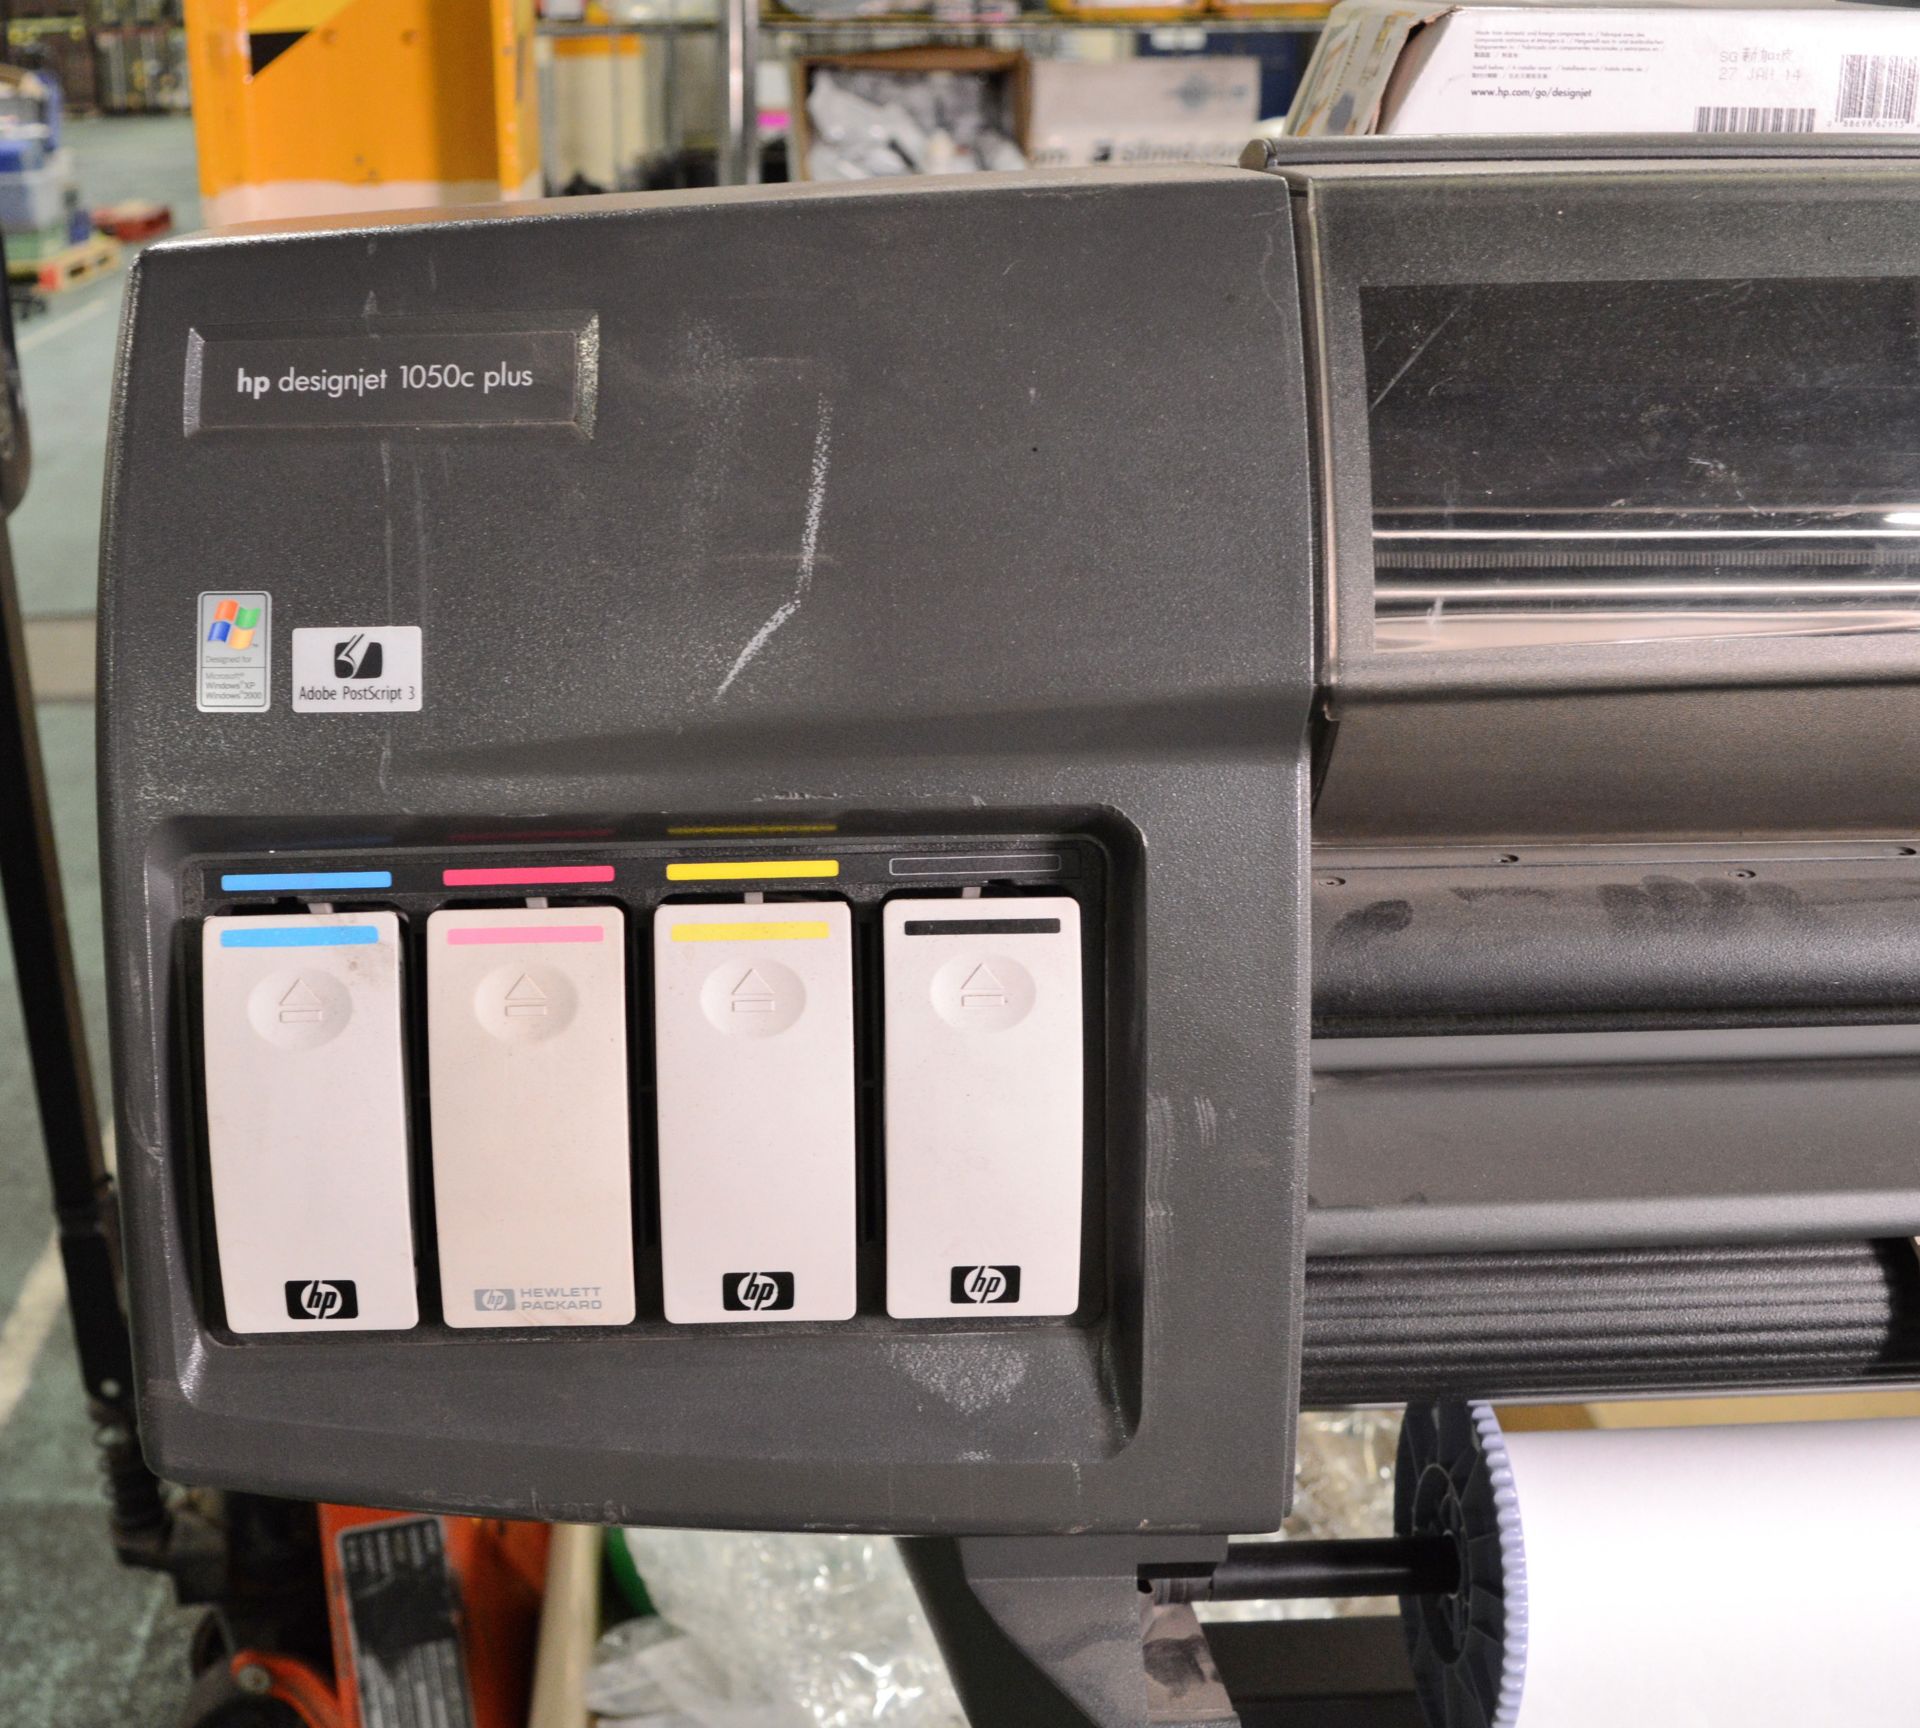 HP Designjet 1050c Plus Printer & Ink Cartridges. The 1050c is a high-performance, high-sp - Image 2 of 11